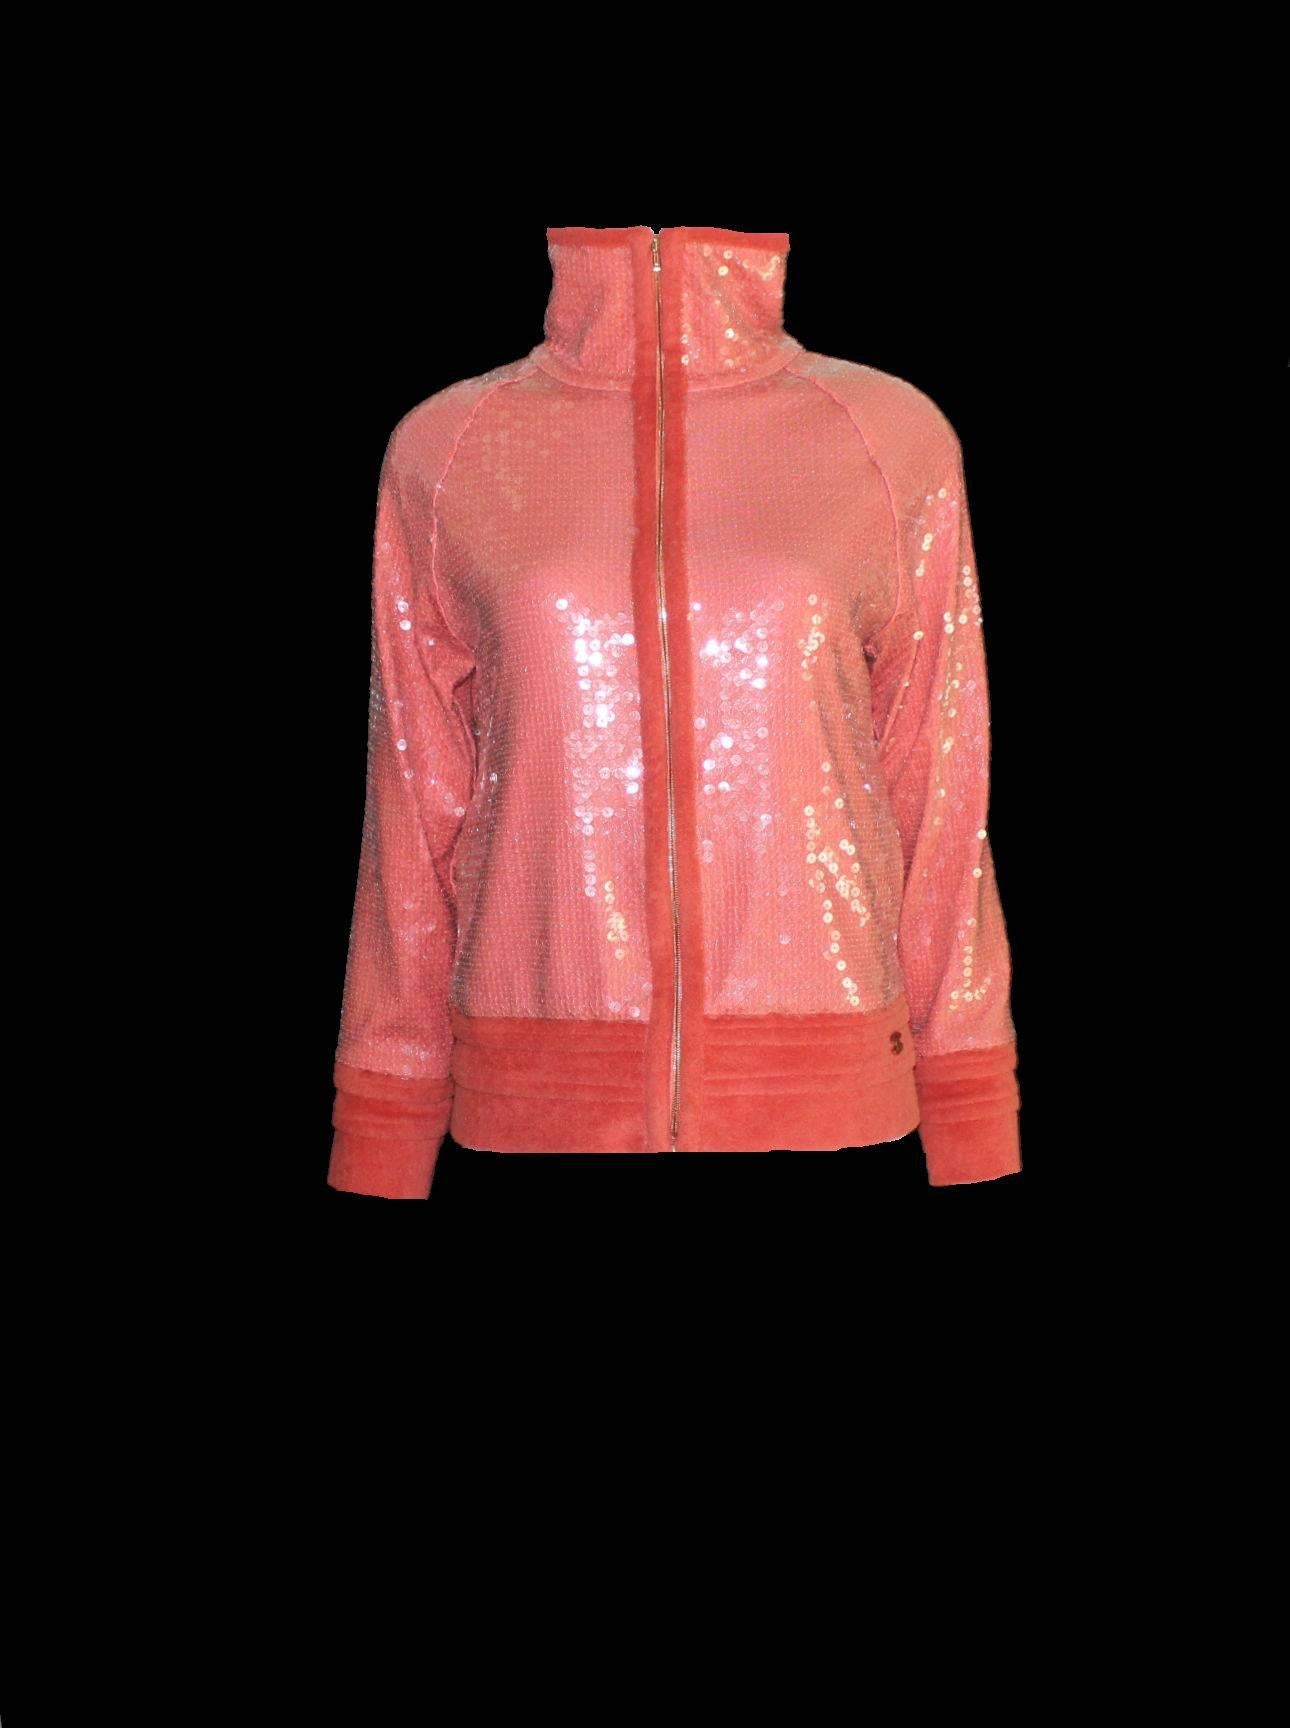 Beautiful CHANEL sequin & terrycloth jacket
A true CHANEL signature item that will last you for many years
Shiny, transparent sequins 
Jacket closes in front with zip, engraved with Chanel's famous 